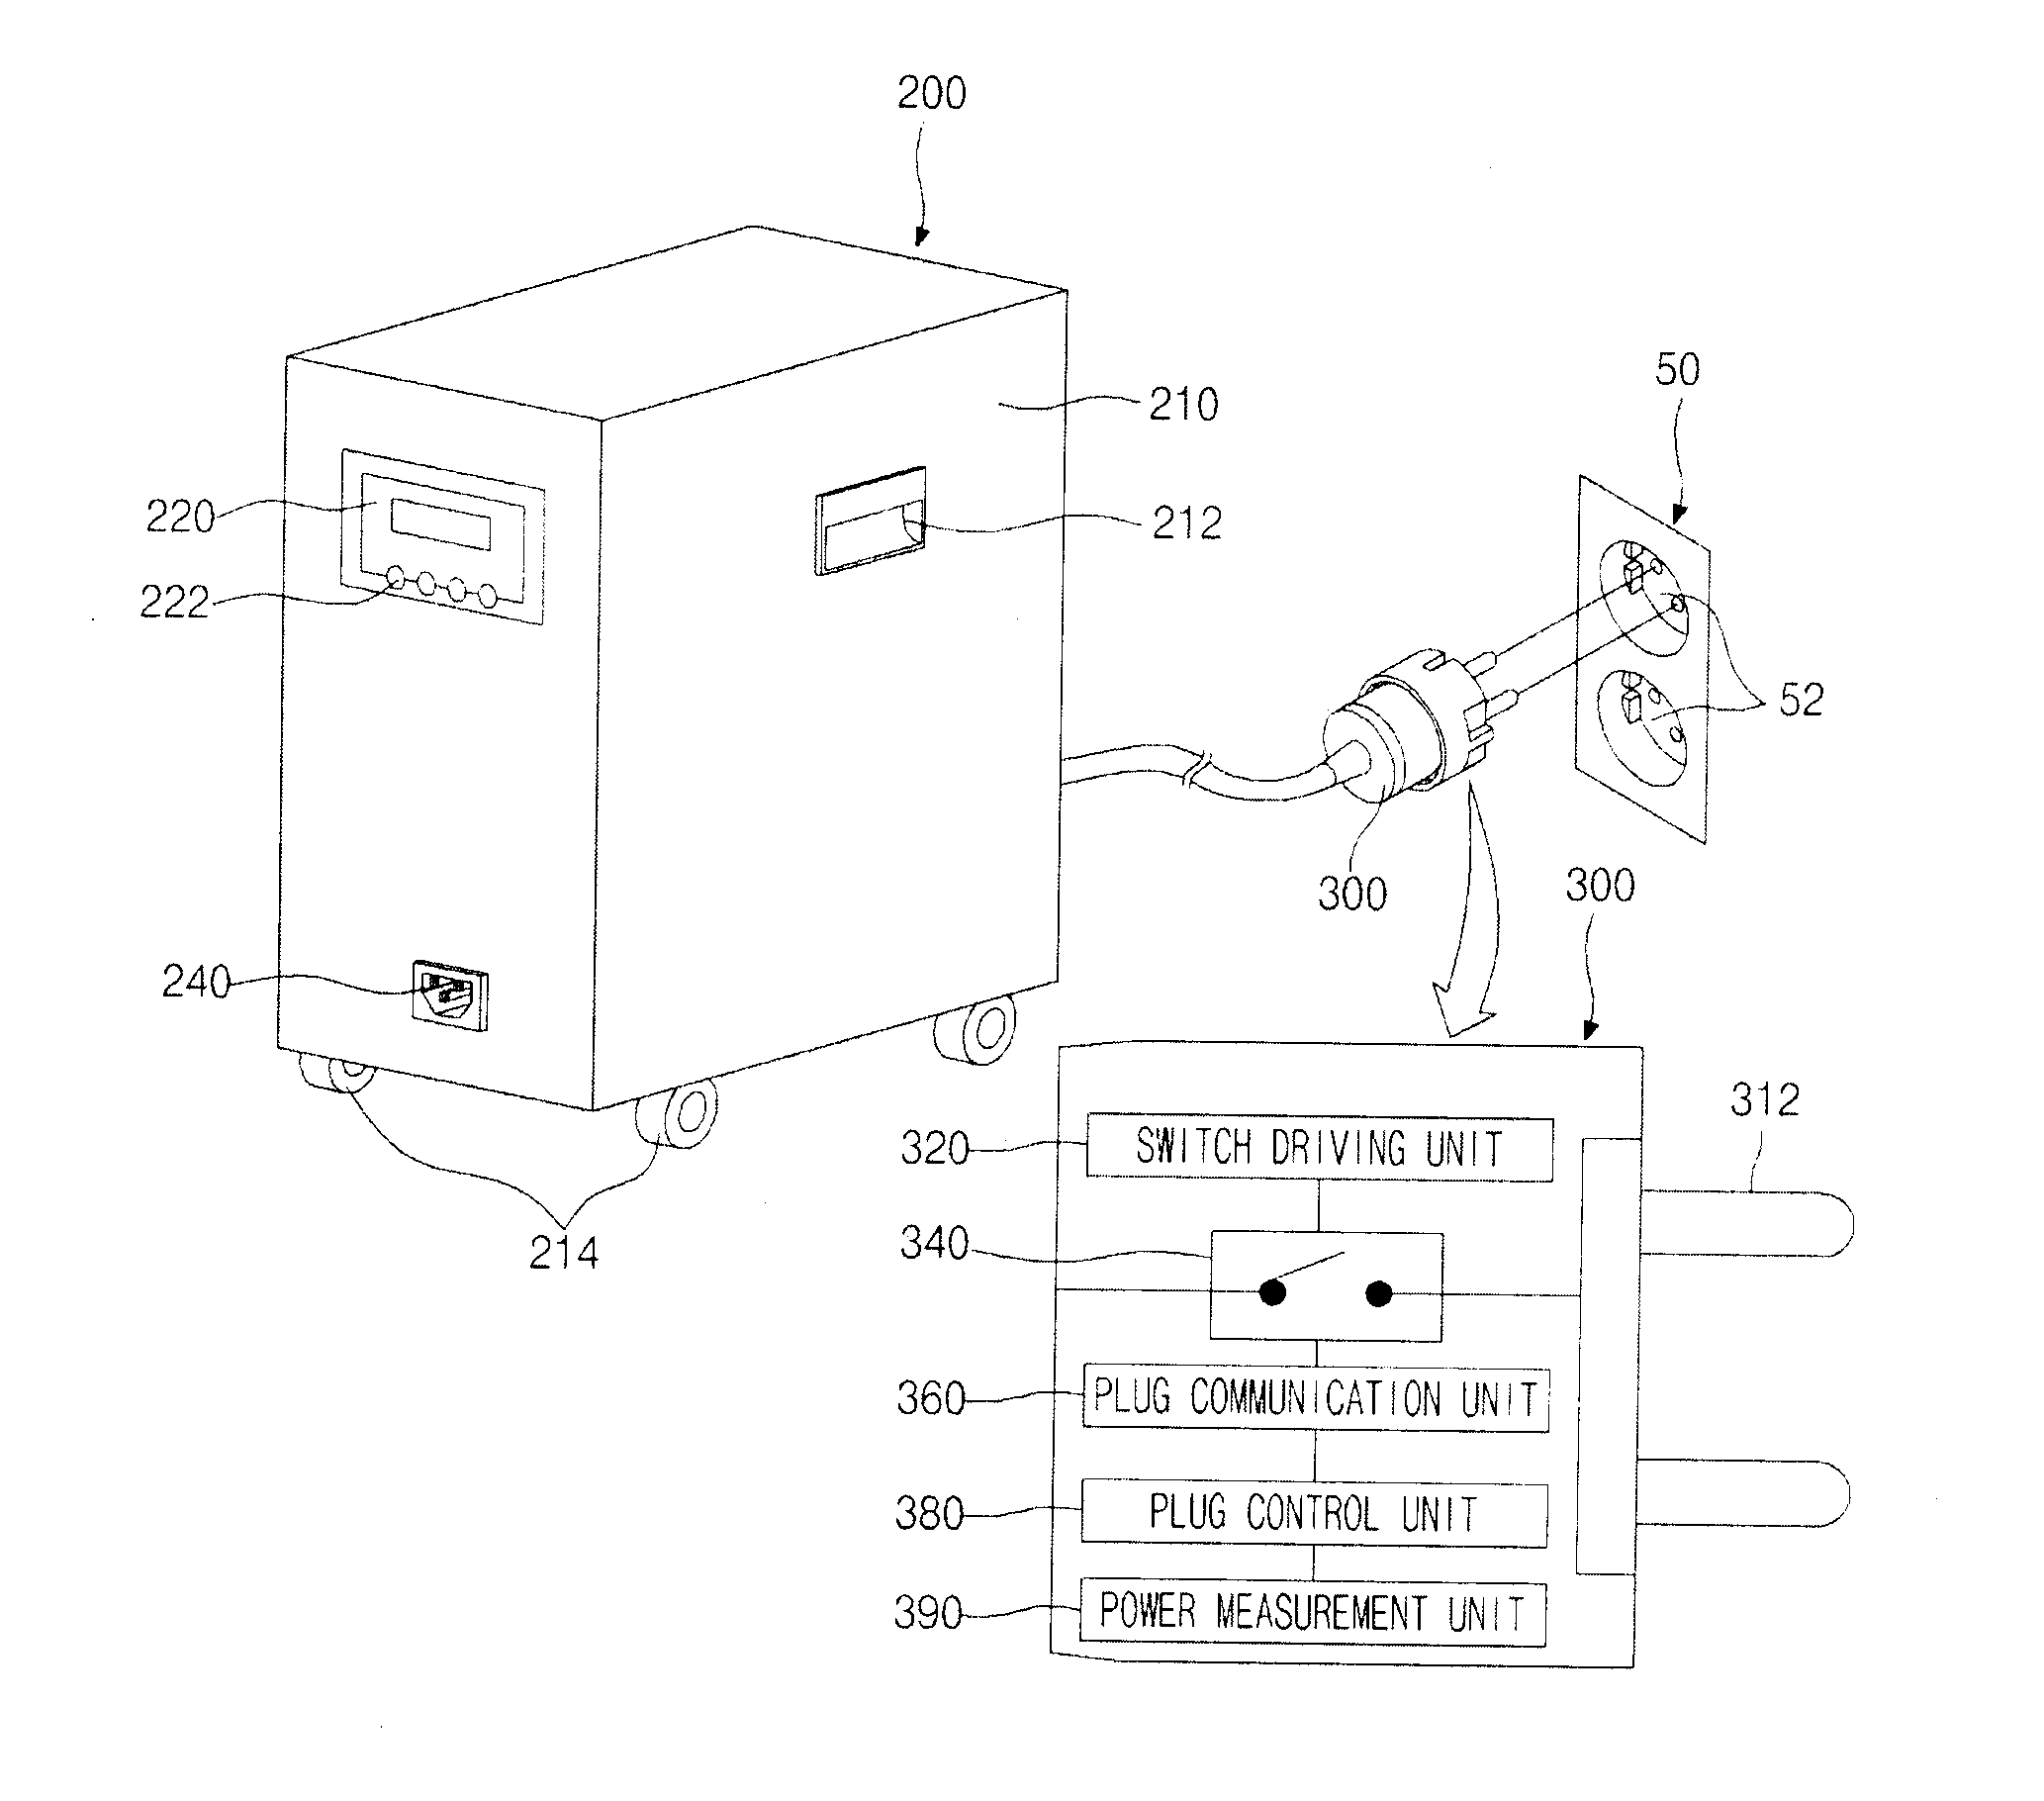 Auxiliary power supply device of home appliances using smart grid